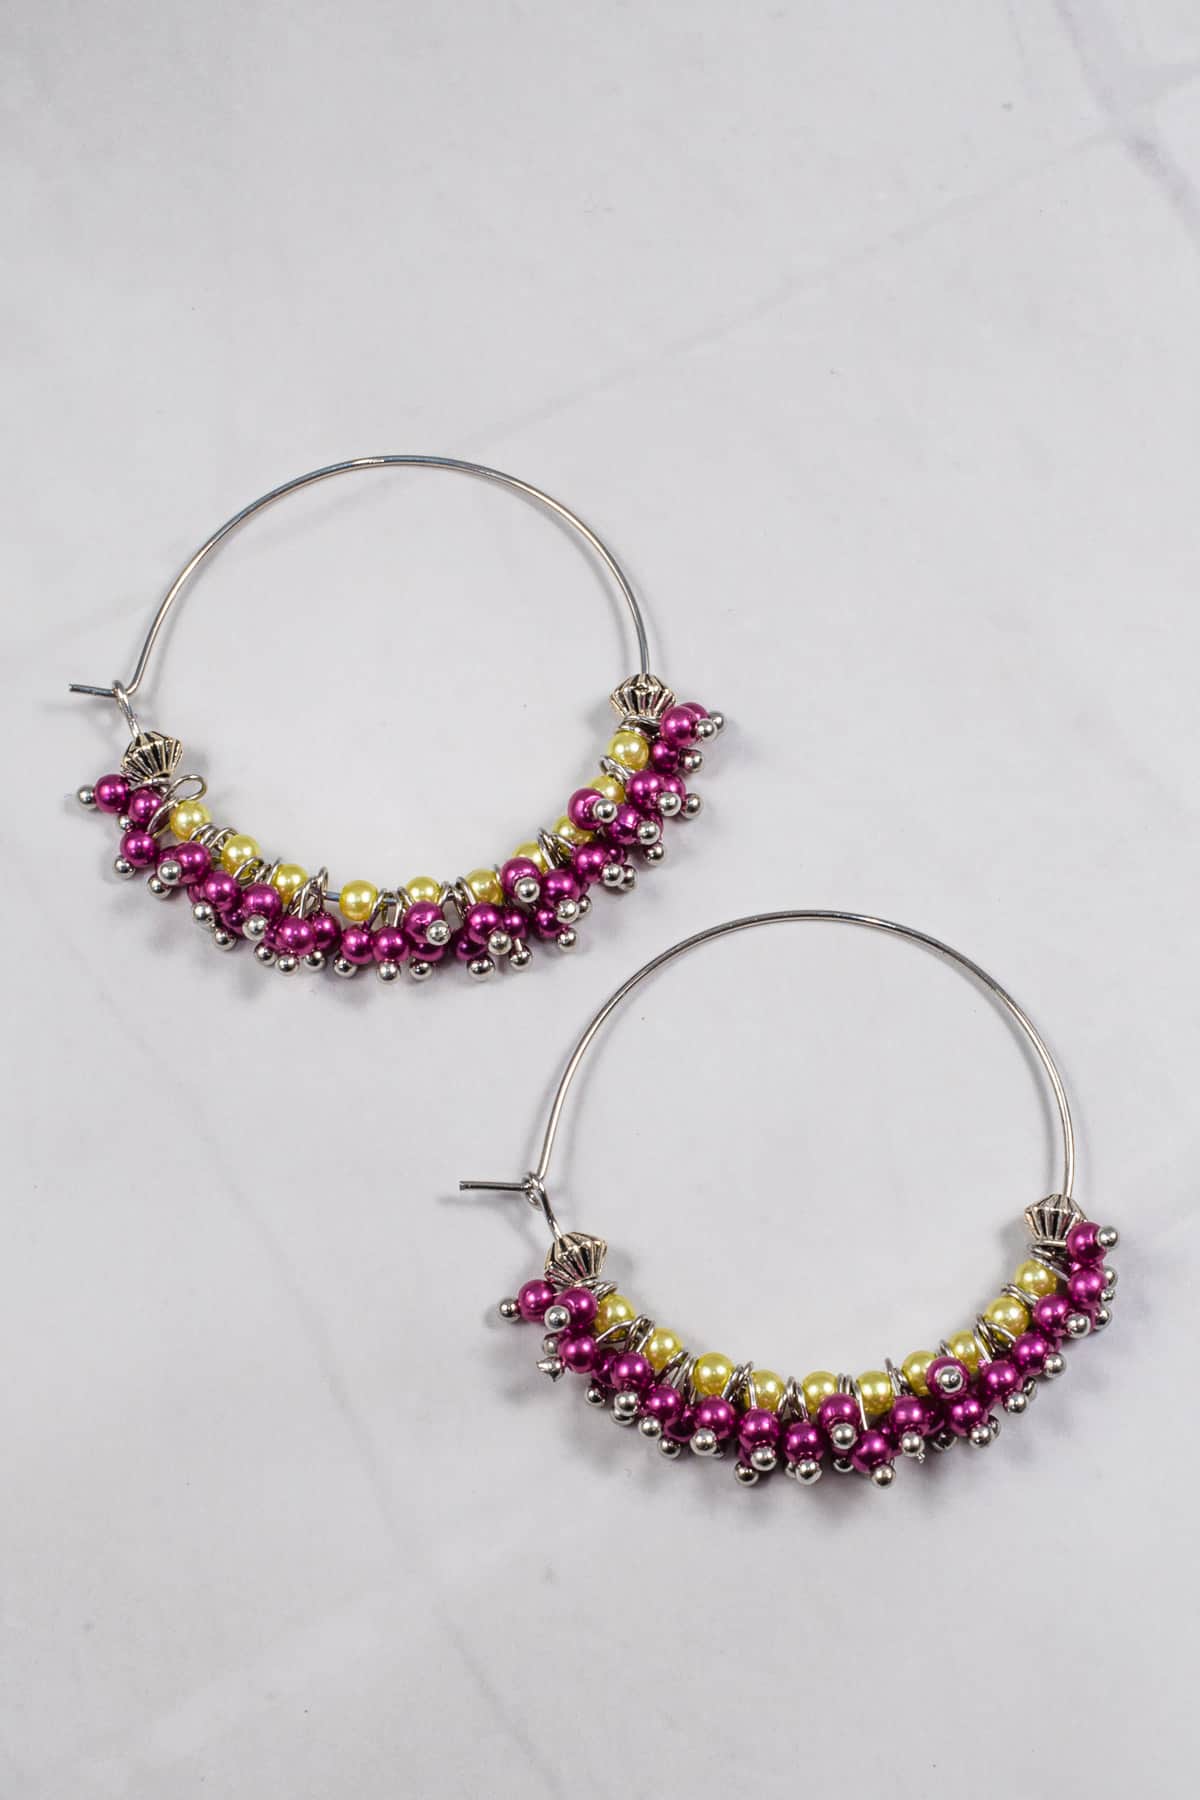 A pair of seed bead earrings in purple and green.